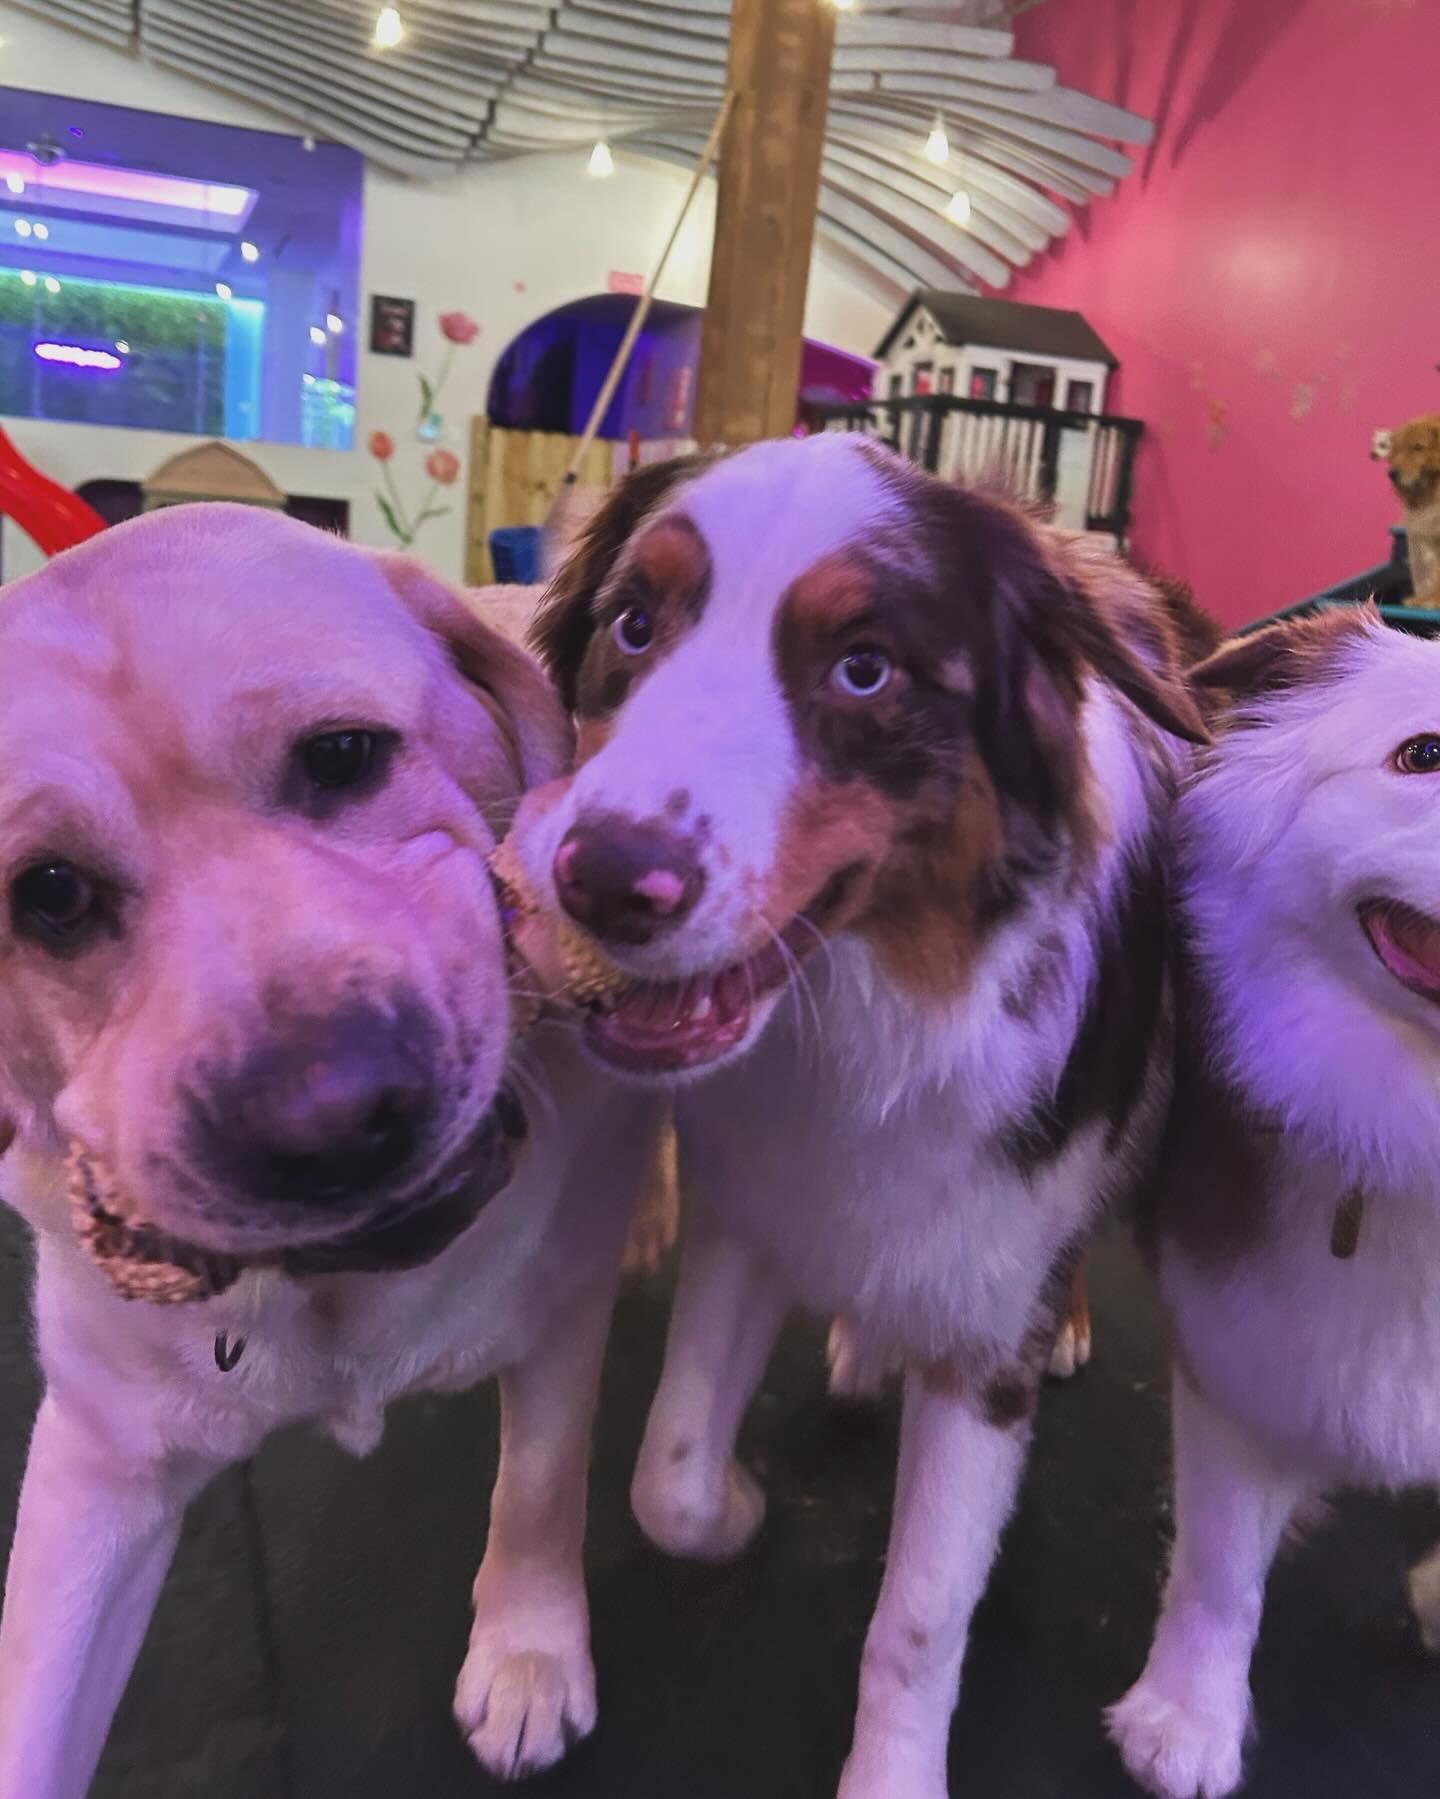 The pack has pawssion for fashion 👗🥰😍 stick around for next event Yappy Hour 🍸 next wednesday! 🐾

🐶

#dogsofchicago #dogparty #pawtytime #hfpc #doggydaycare #doglove #cutedogs #puppies #cute